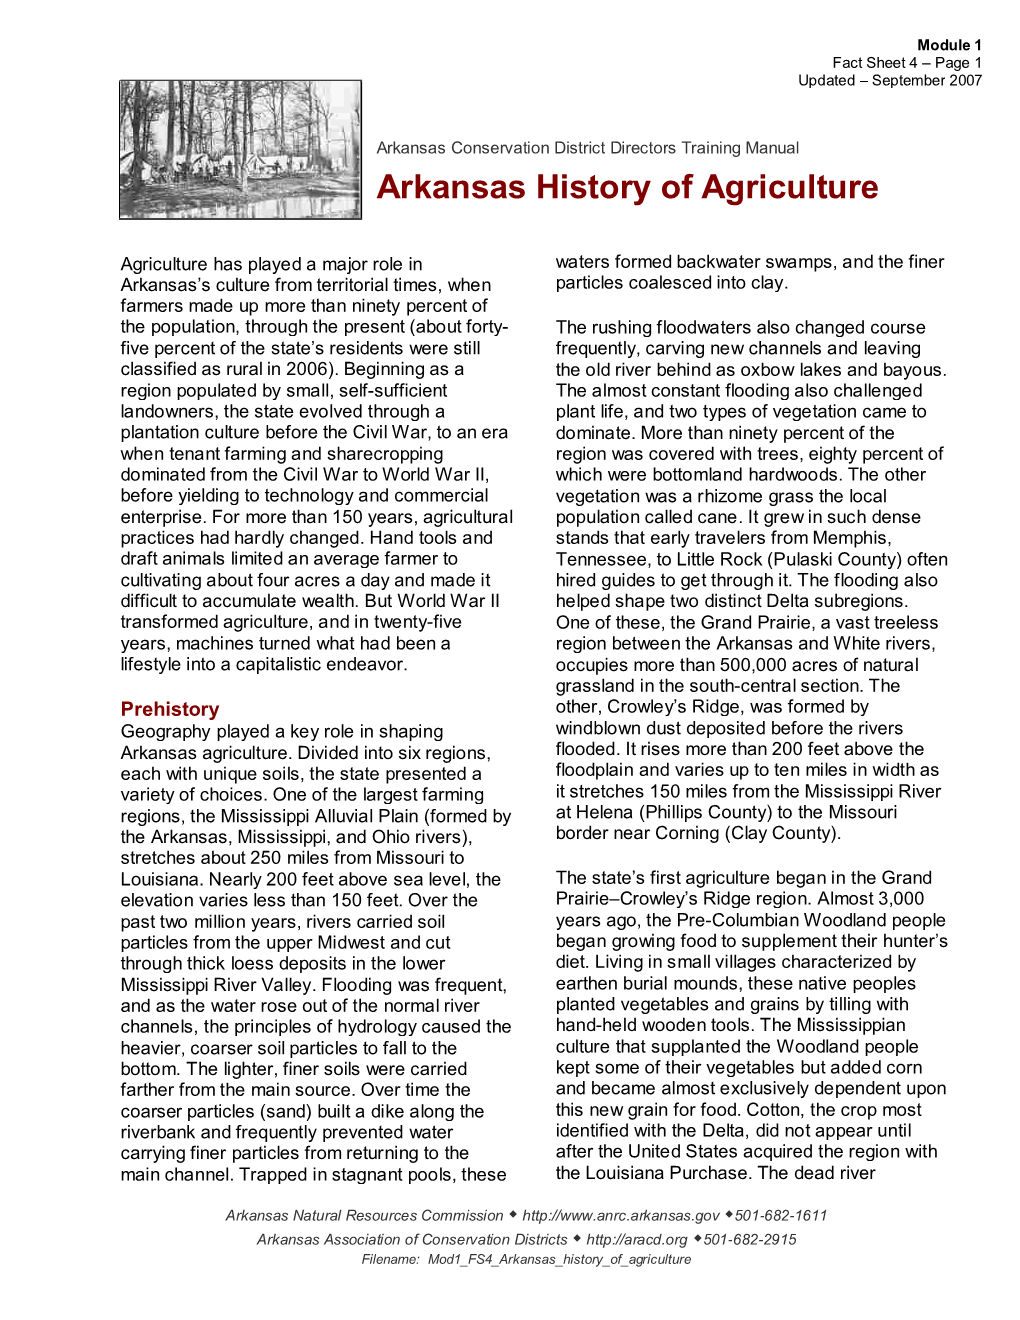 Arkansas History of Agriculture